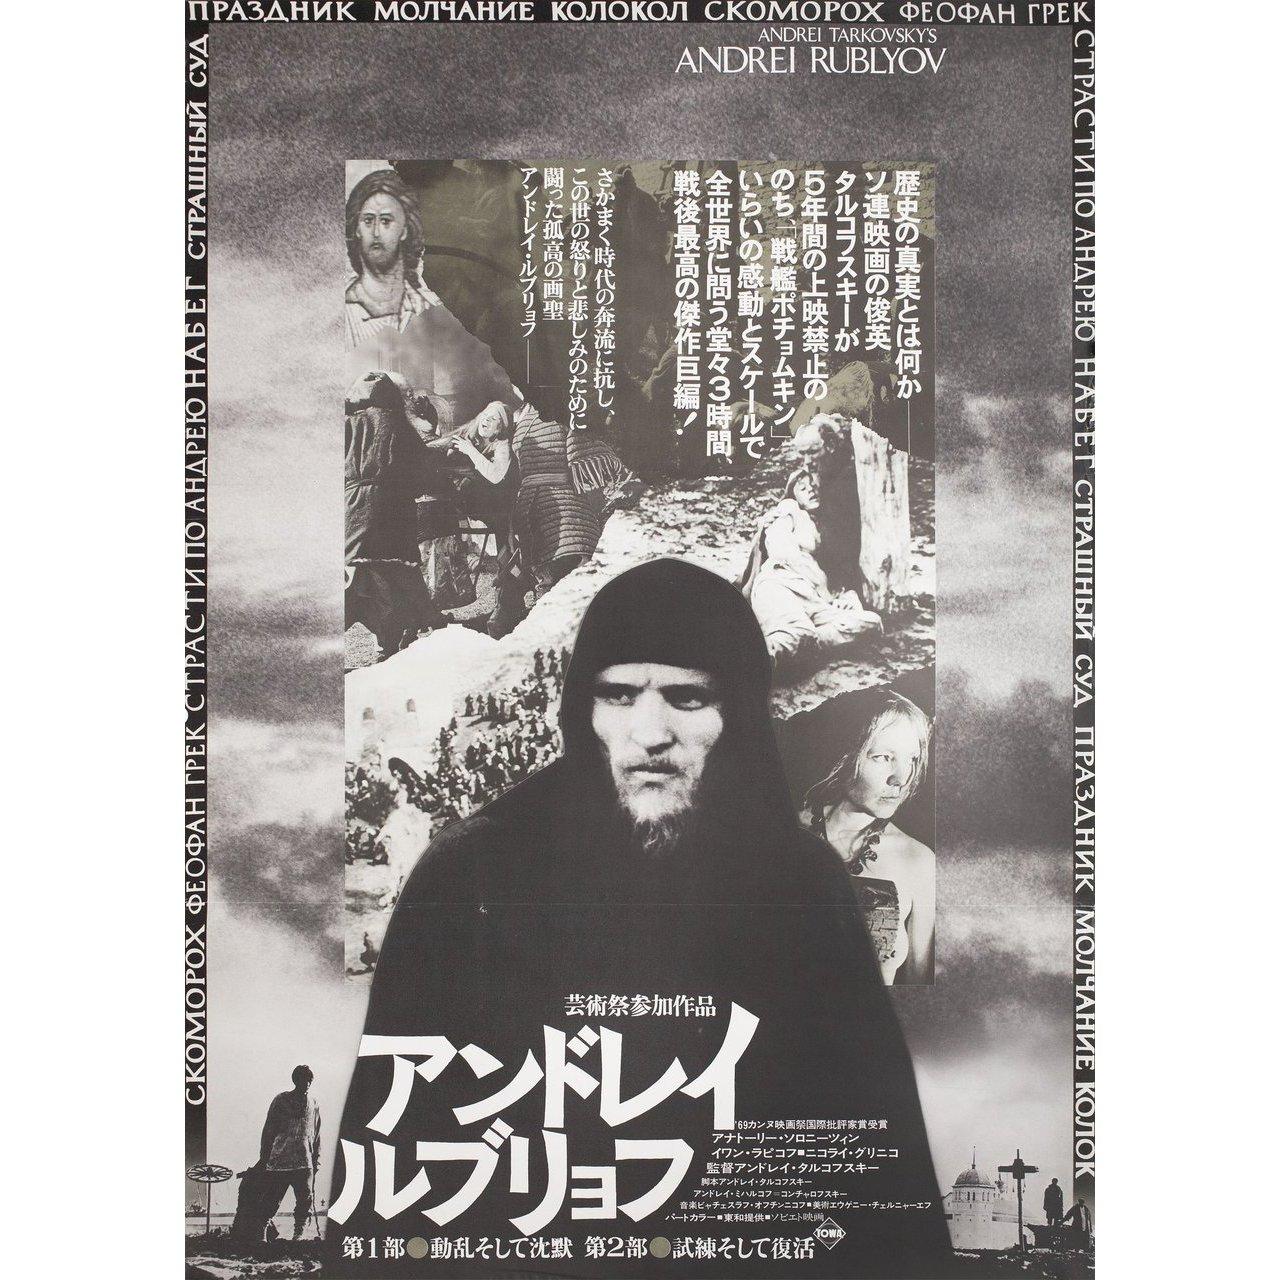 Original 1969 Japanese B2 poster for the 1966 film Andrei Rublev directed by Andrei Tarkovsky with Anatoliy Solonitsyn / Ivan Lapikov / Nikolay Grinko / Nikolay Sergeev. Very Good-Fine condition, folded. Many original posters were issued folded or